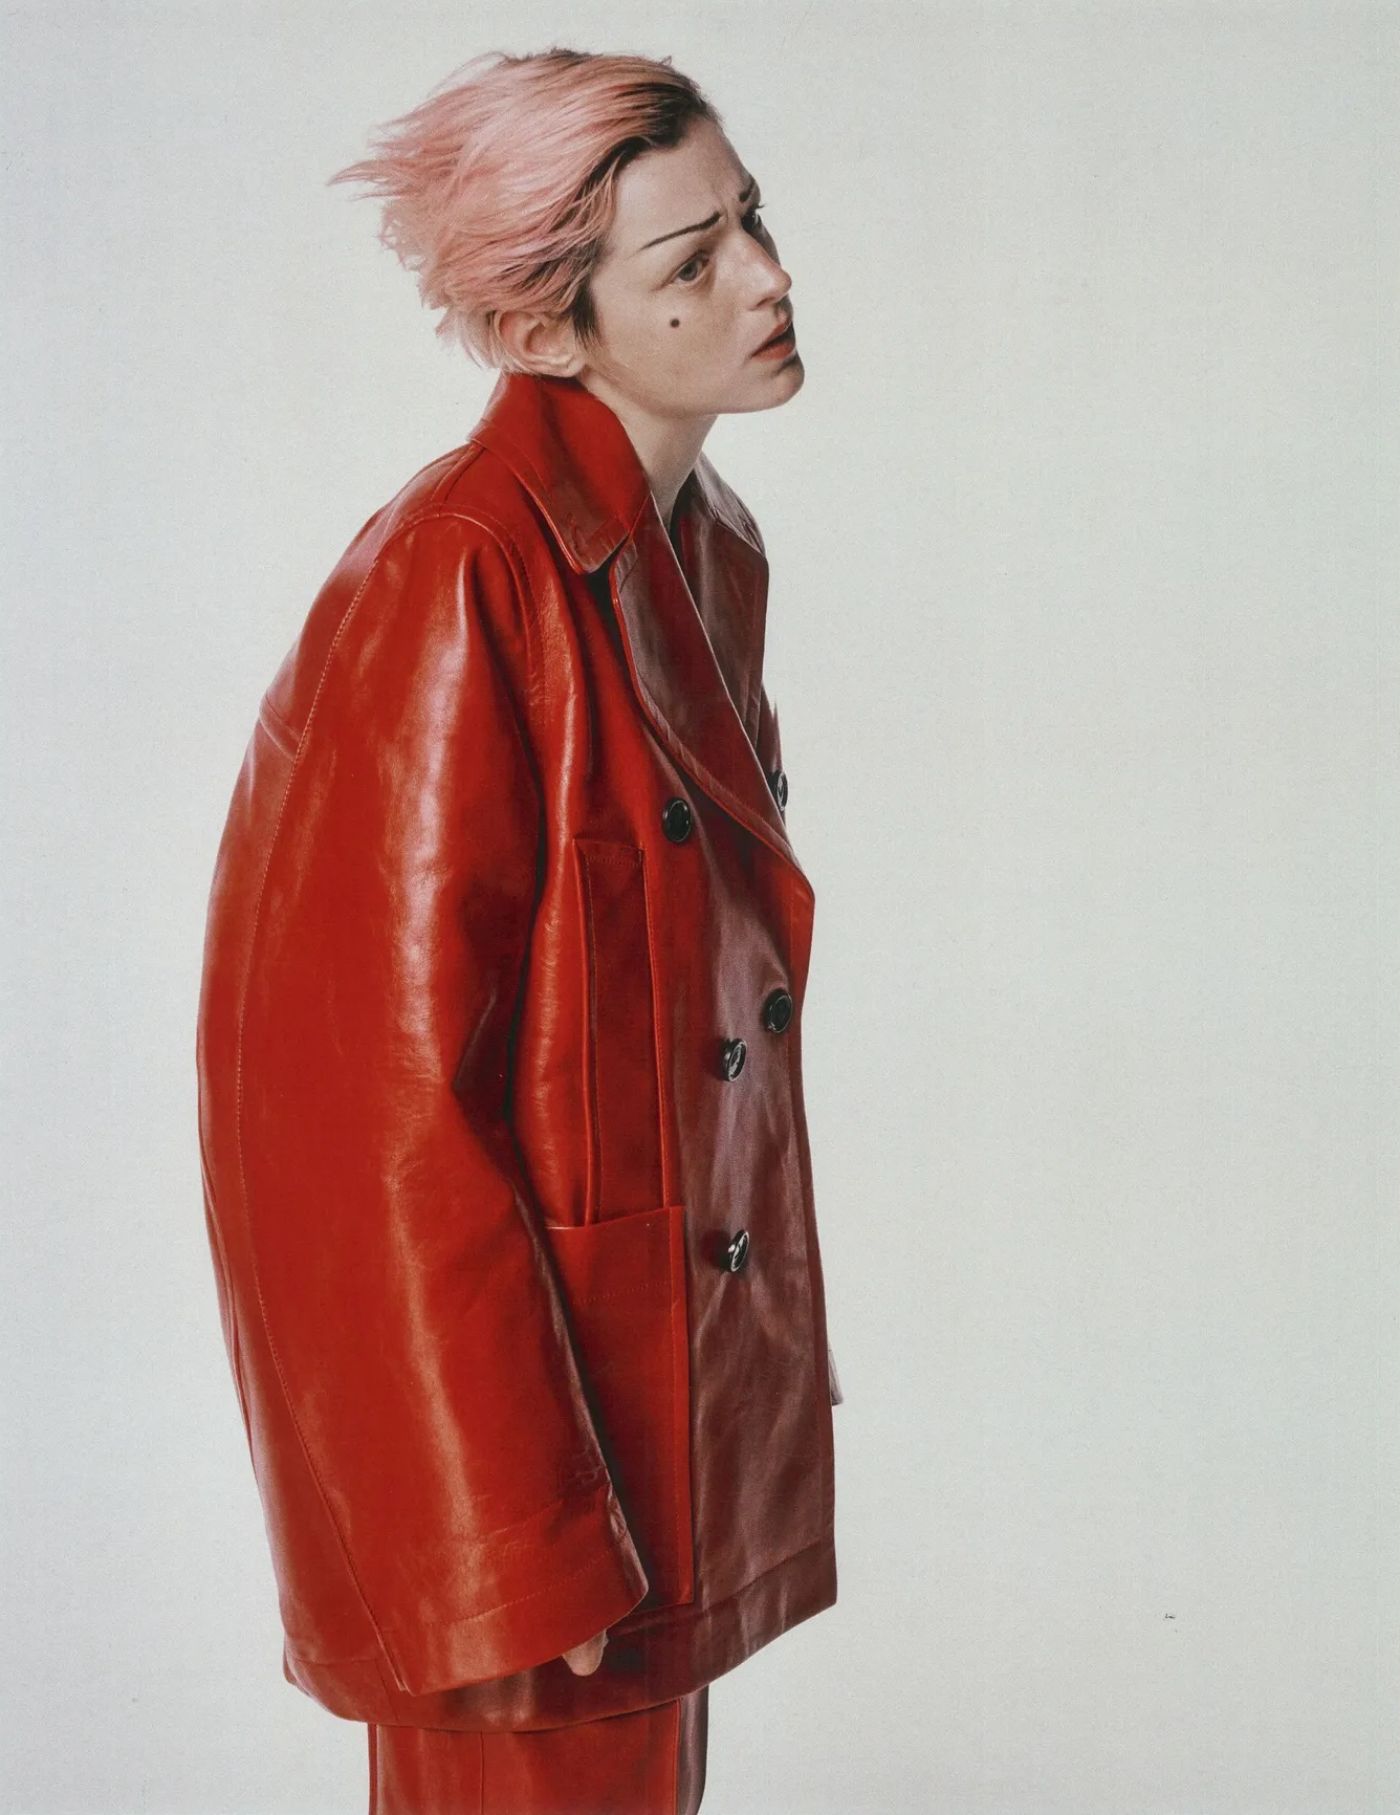 Emma Corrin in Bottega Veneta Red Curved Shape Leather Coat by Emily Lipson for The Cut October 2022